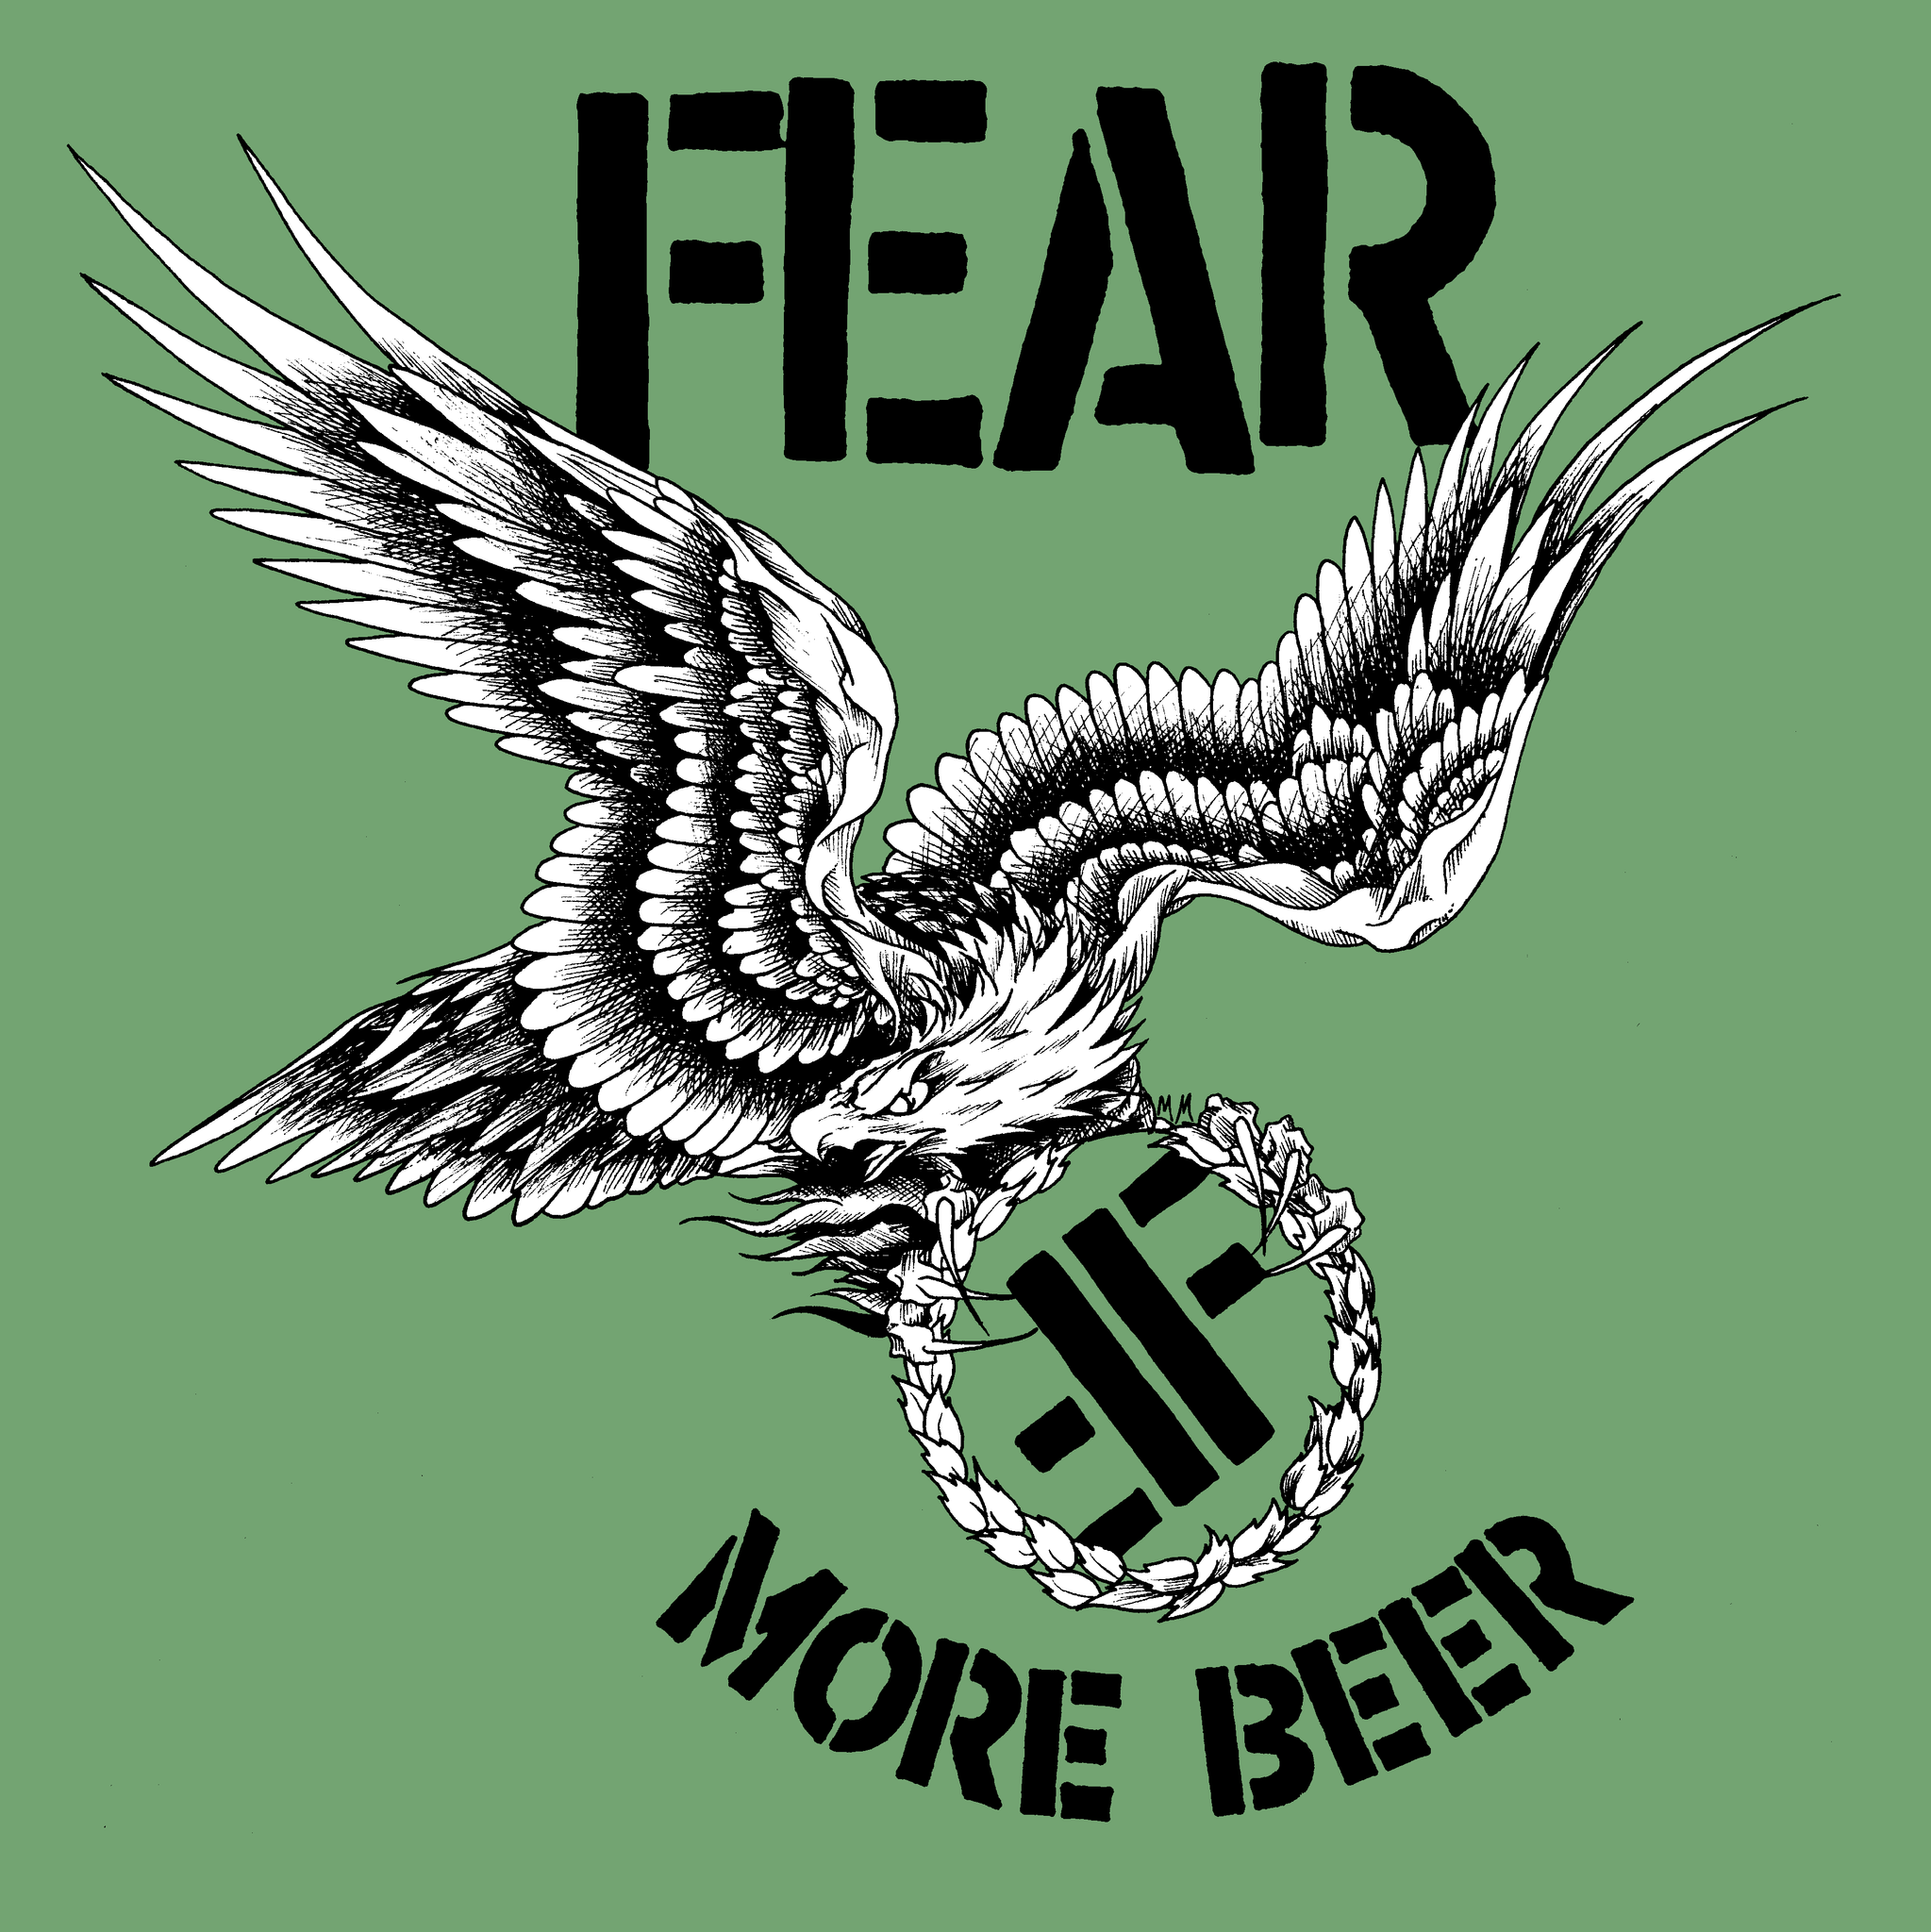 FEAR - "MORE BEER" 35TH ANNIVERSARY LIMITED EDITION 2XCD